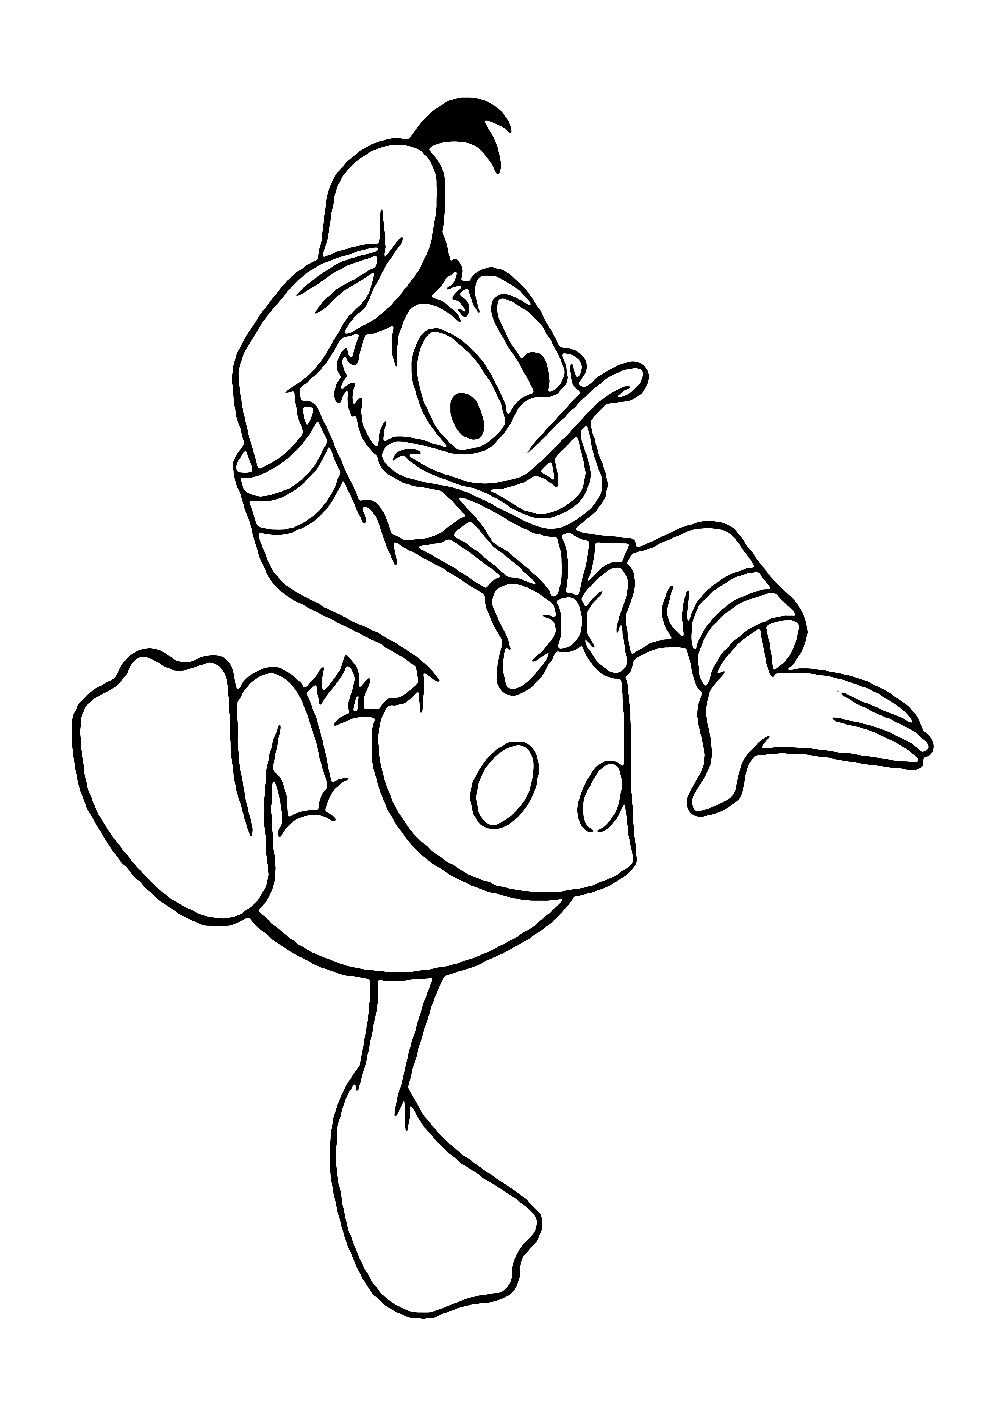 Donald Duck Coloring Pages (Updated): Printable PDF